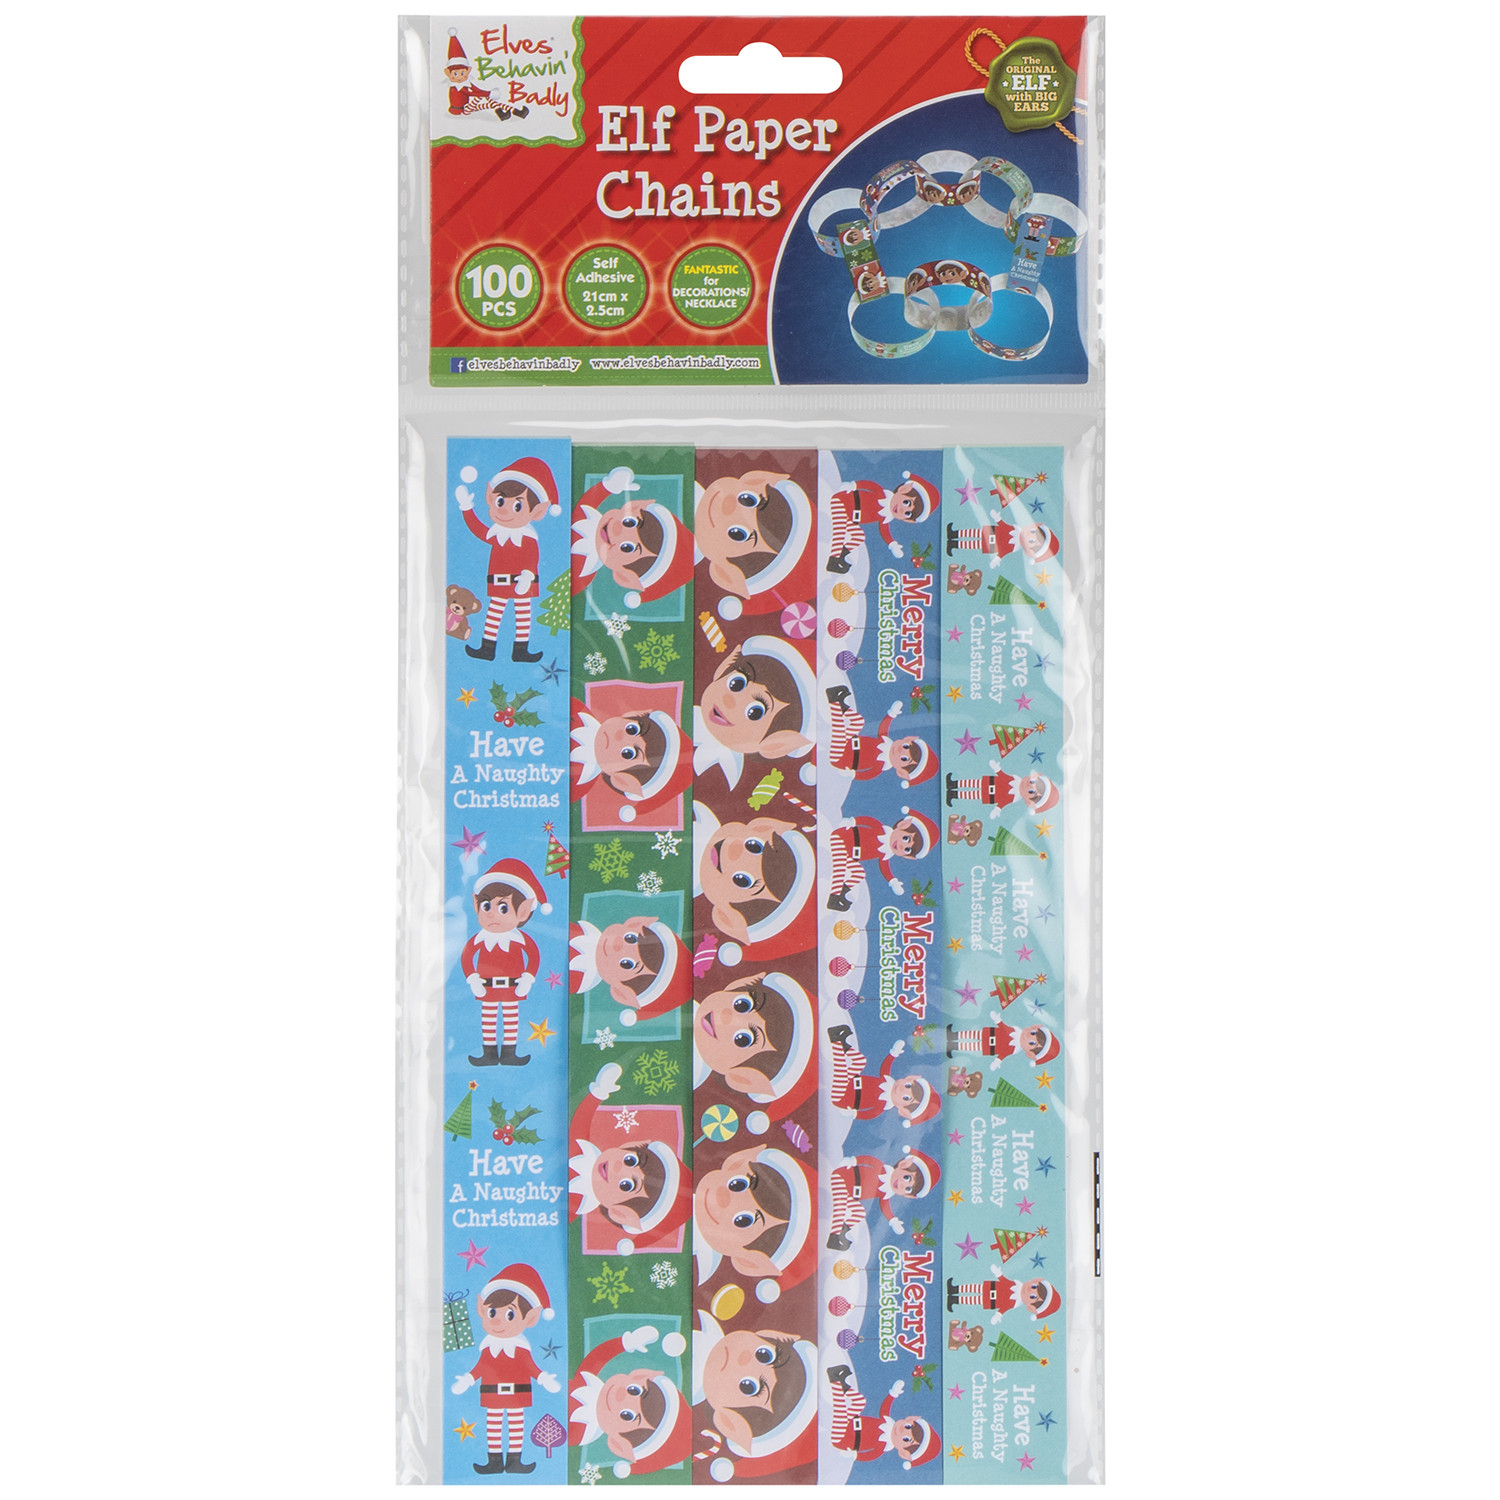 Pack of 100 Elf Paper Chains Image